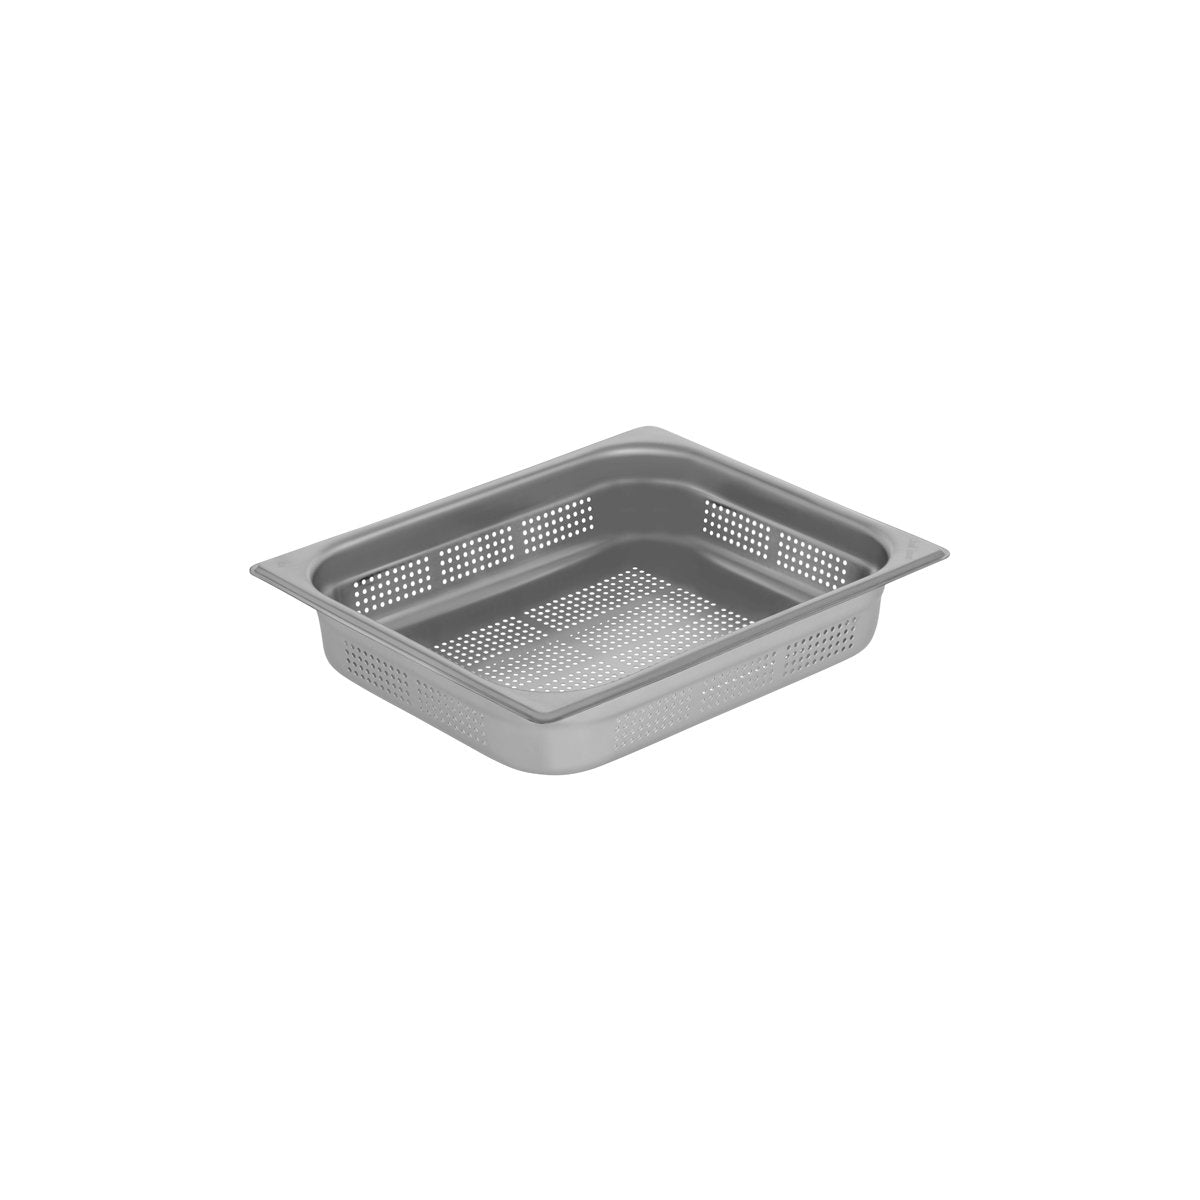 GNP-12065 Chef Inox Gastronorm Pan Perforated 1/2 Size 65mm Tomkin Australia Hospitality Supplies